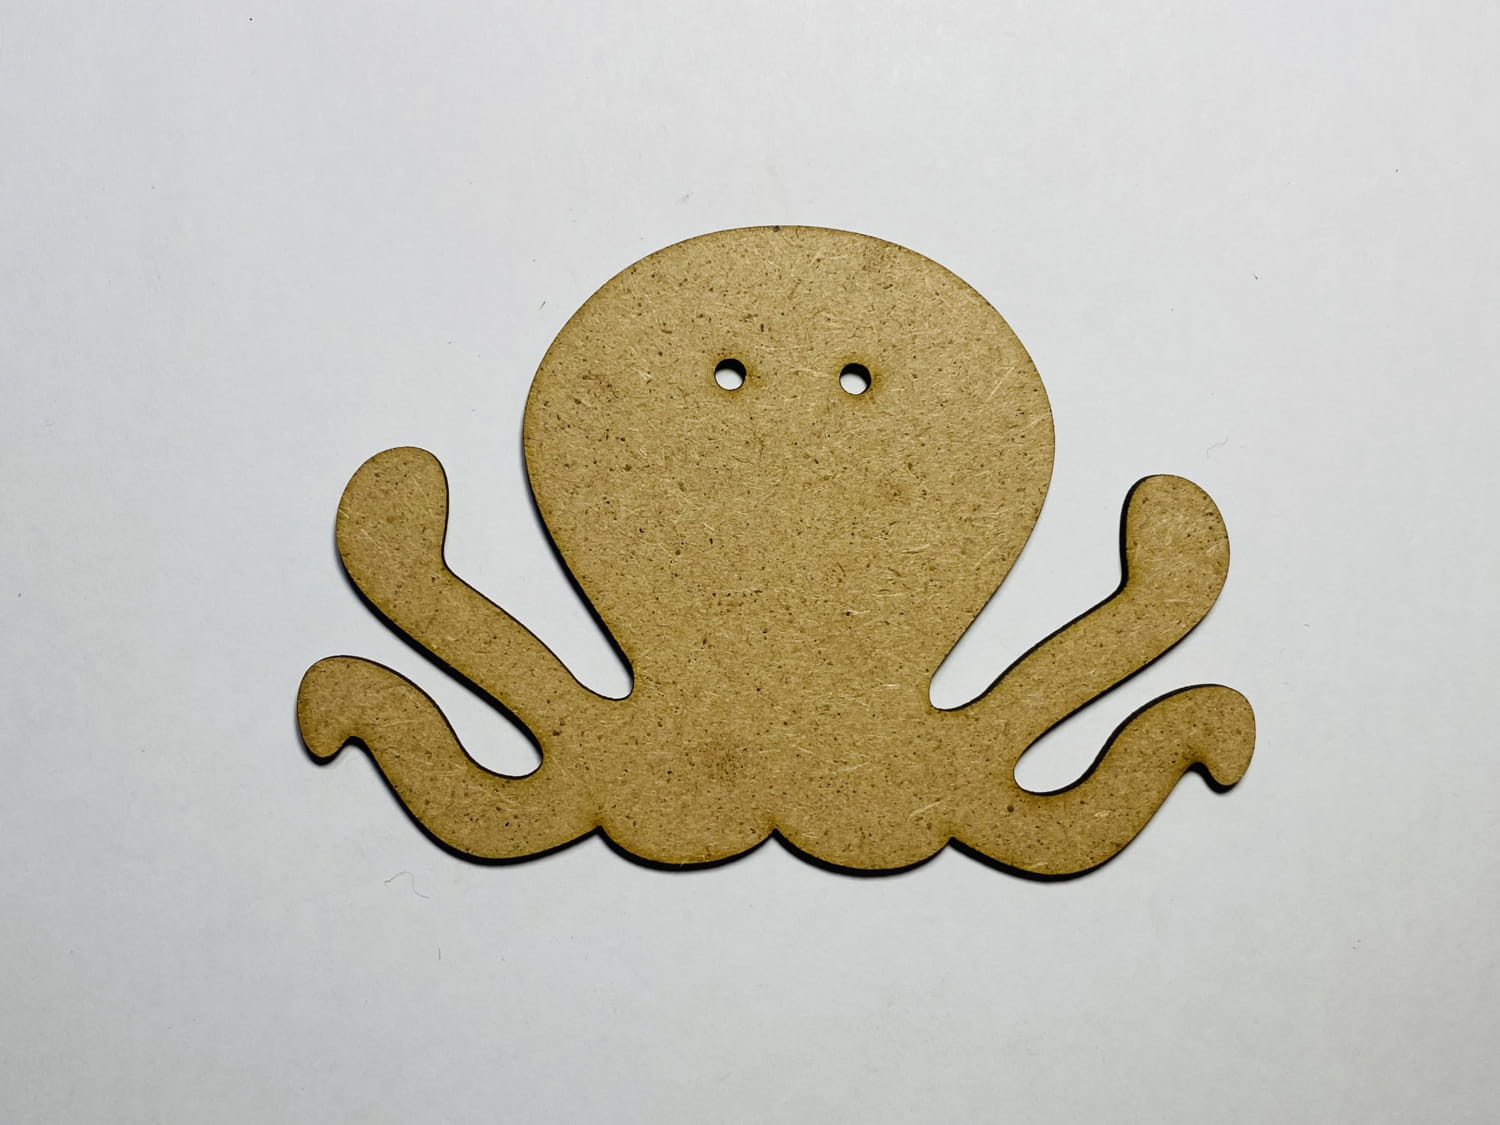 Laser Cut Wood Octopus Cutout Octopus Shape Unfinished Free Vector